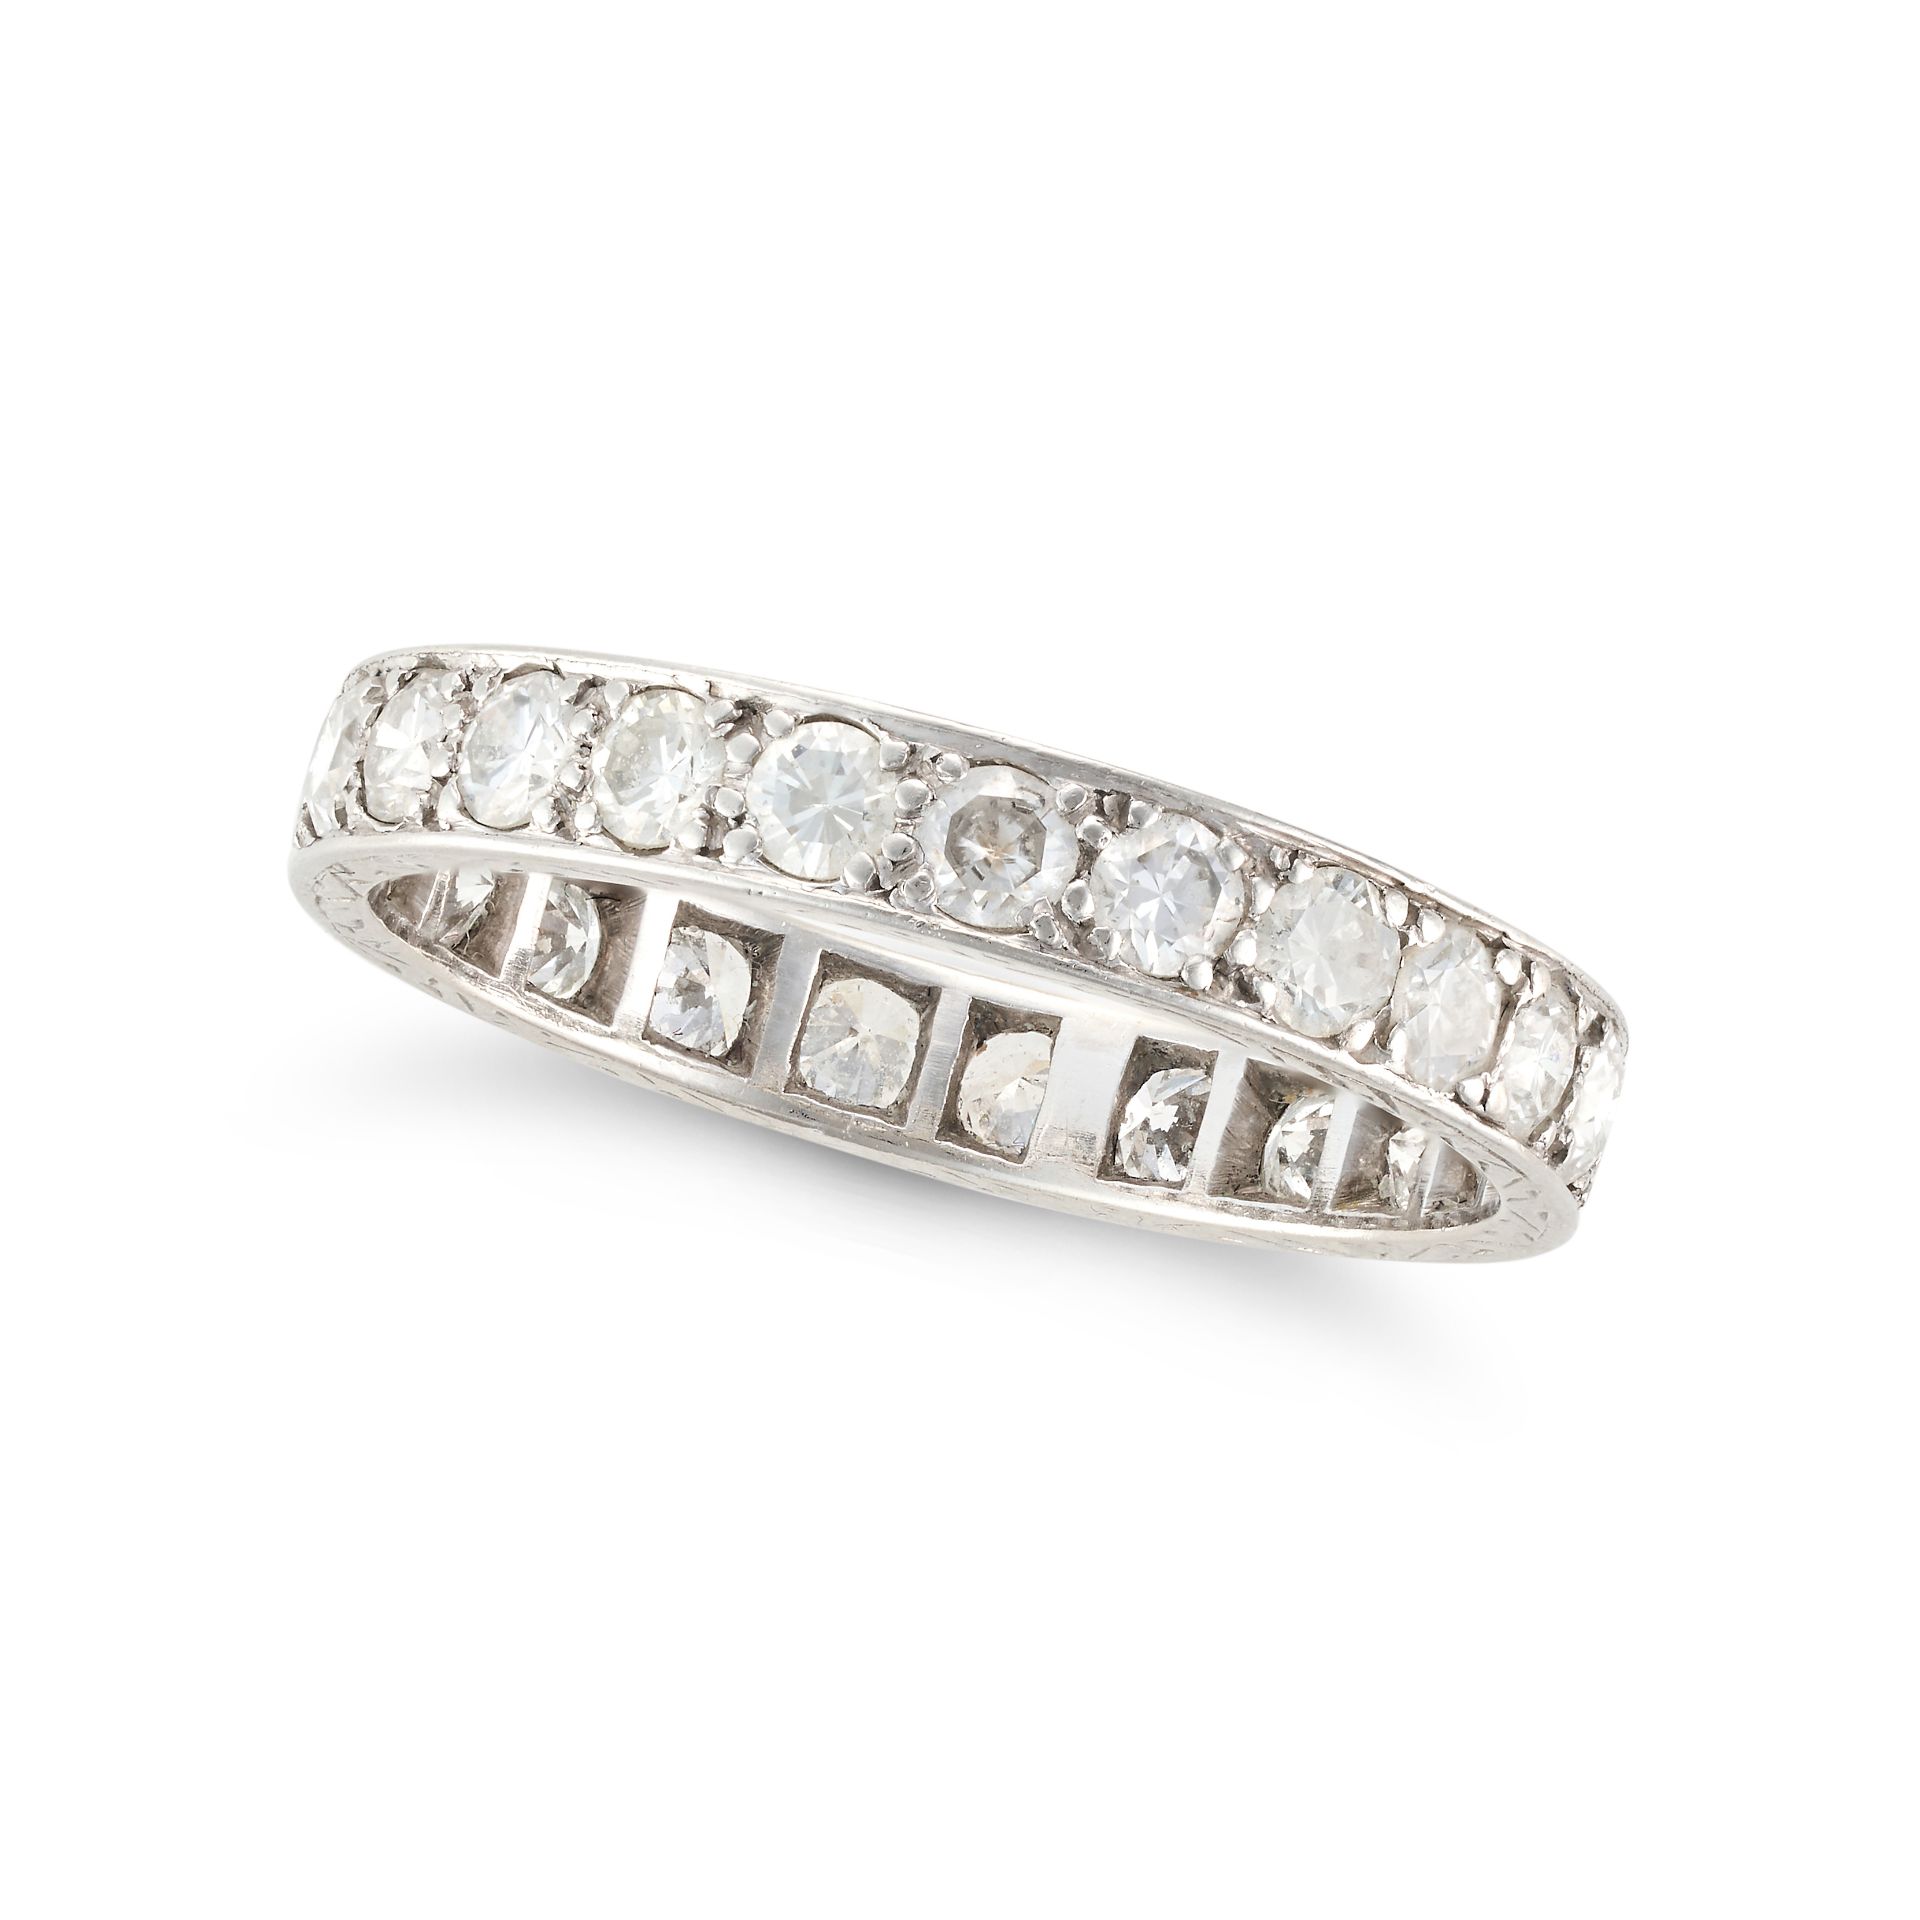 A DIAMOND FULL ETERNITY RING set all around with with a row of round brilliant cut diamonds, the ...